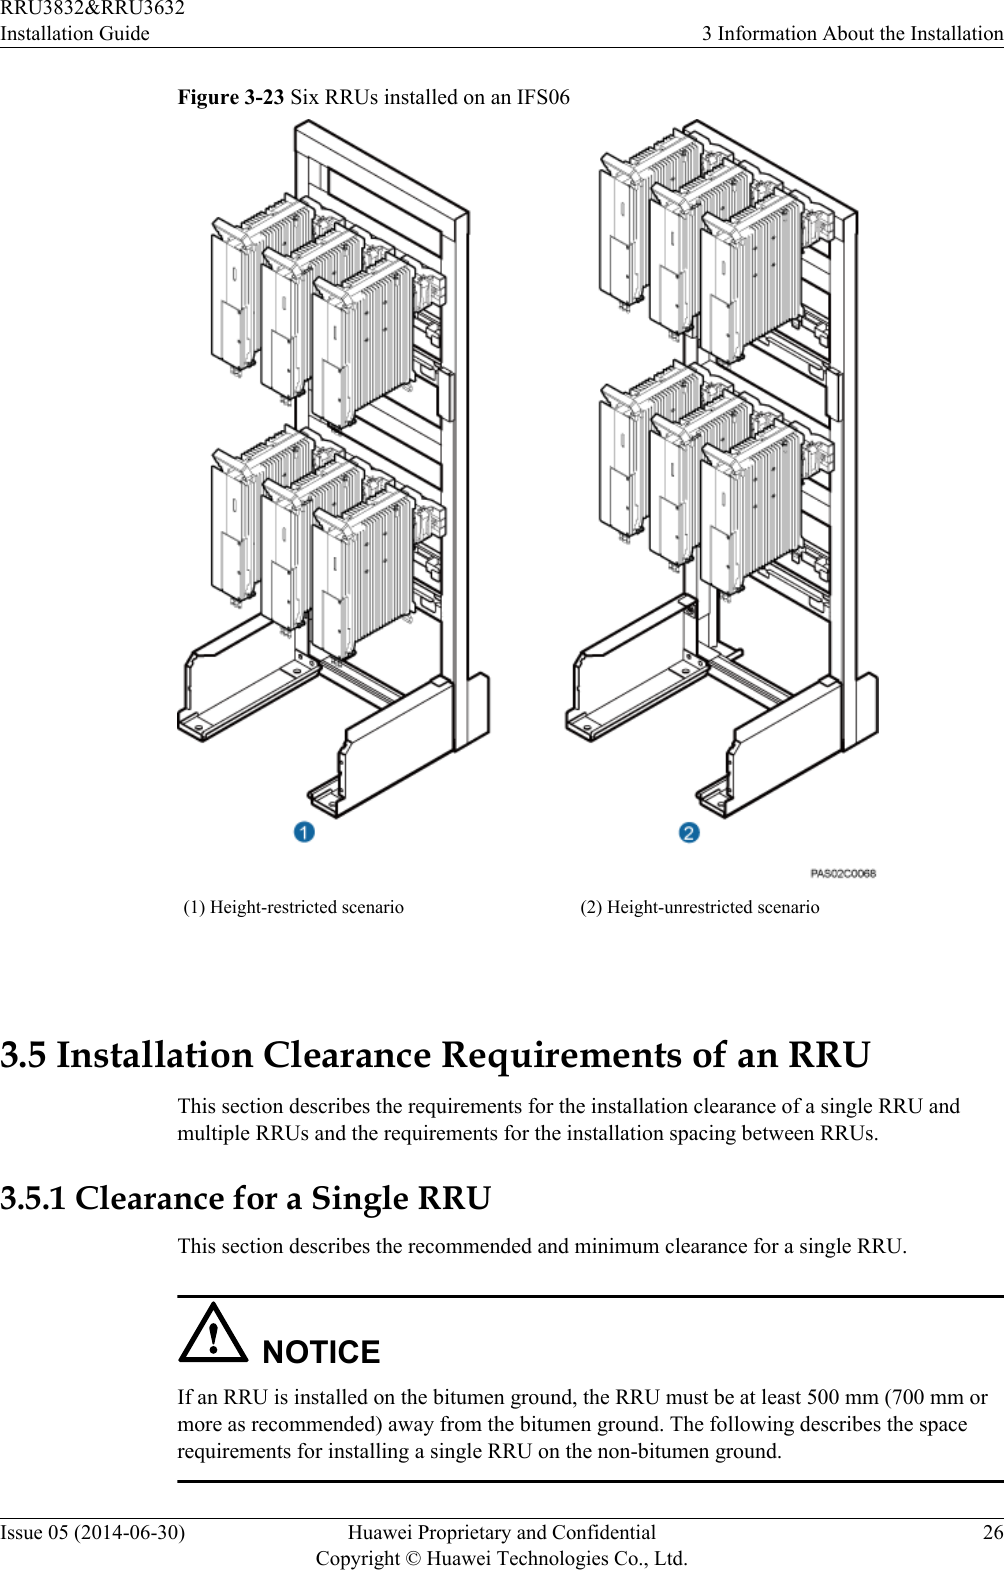 Figure 3-23 Six RRUs installed on an IFS06(1) Height-restricted scenario (2) Height-unrestricted scenario 3.5 Installation Clearance Requirements of an RRUThis section describes the requirements for the installation clearance of a single RRU andmultiple RRUs and the requirements for the installation spacing between RRUs.3.5.1 Clearance for a Single RRUThis section describes the recommended and minimum clearance for a single RRU.NOTICEIf an RRU is installed on the bitumen ground, the RRU must be at least 500 mm (700 mm ormore as recommended) away from the bitumen ground. The following describes the spacerequirements for installing a single RRU on the non-bitumen ground.RRU3832&amp;RRU3632Installation Guide 3 Information About the InstallationIssue 05 (2014-06-30) Huawei Proprietary and ConfidentialCopyright © Huawei Technologies Co., Ltd.26